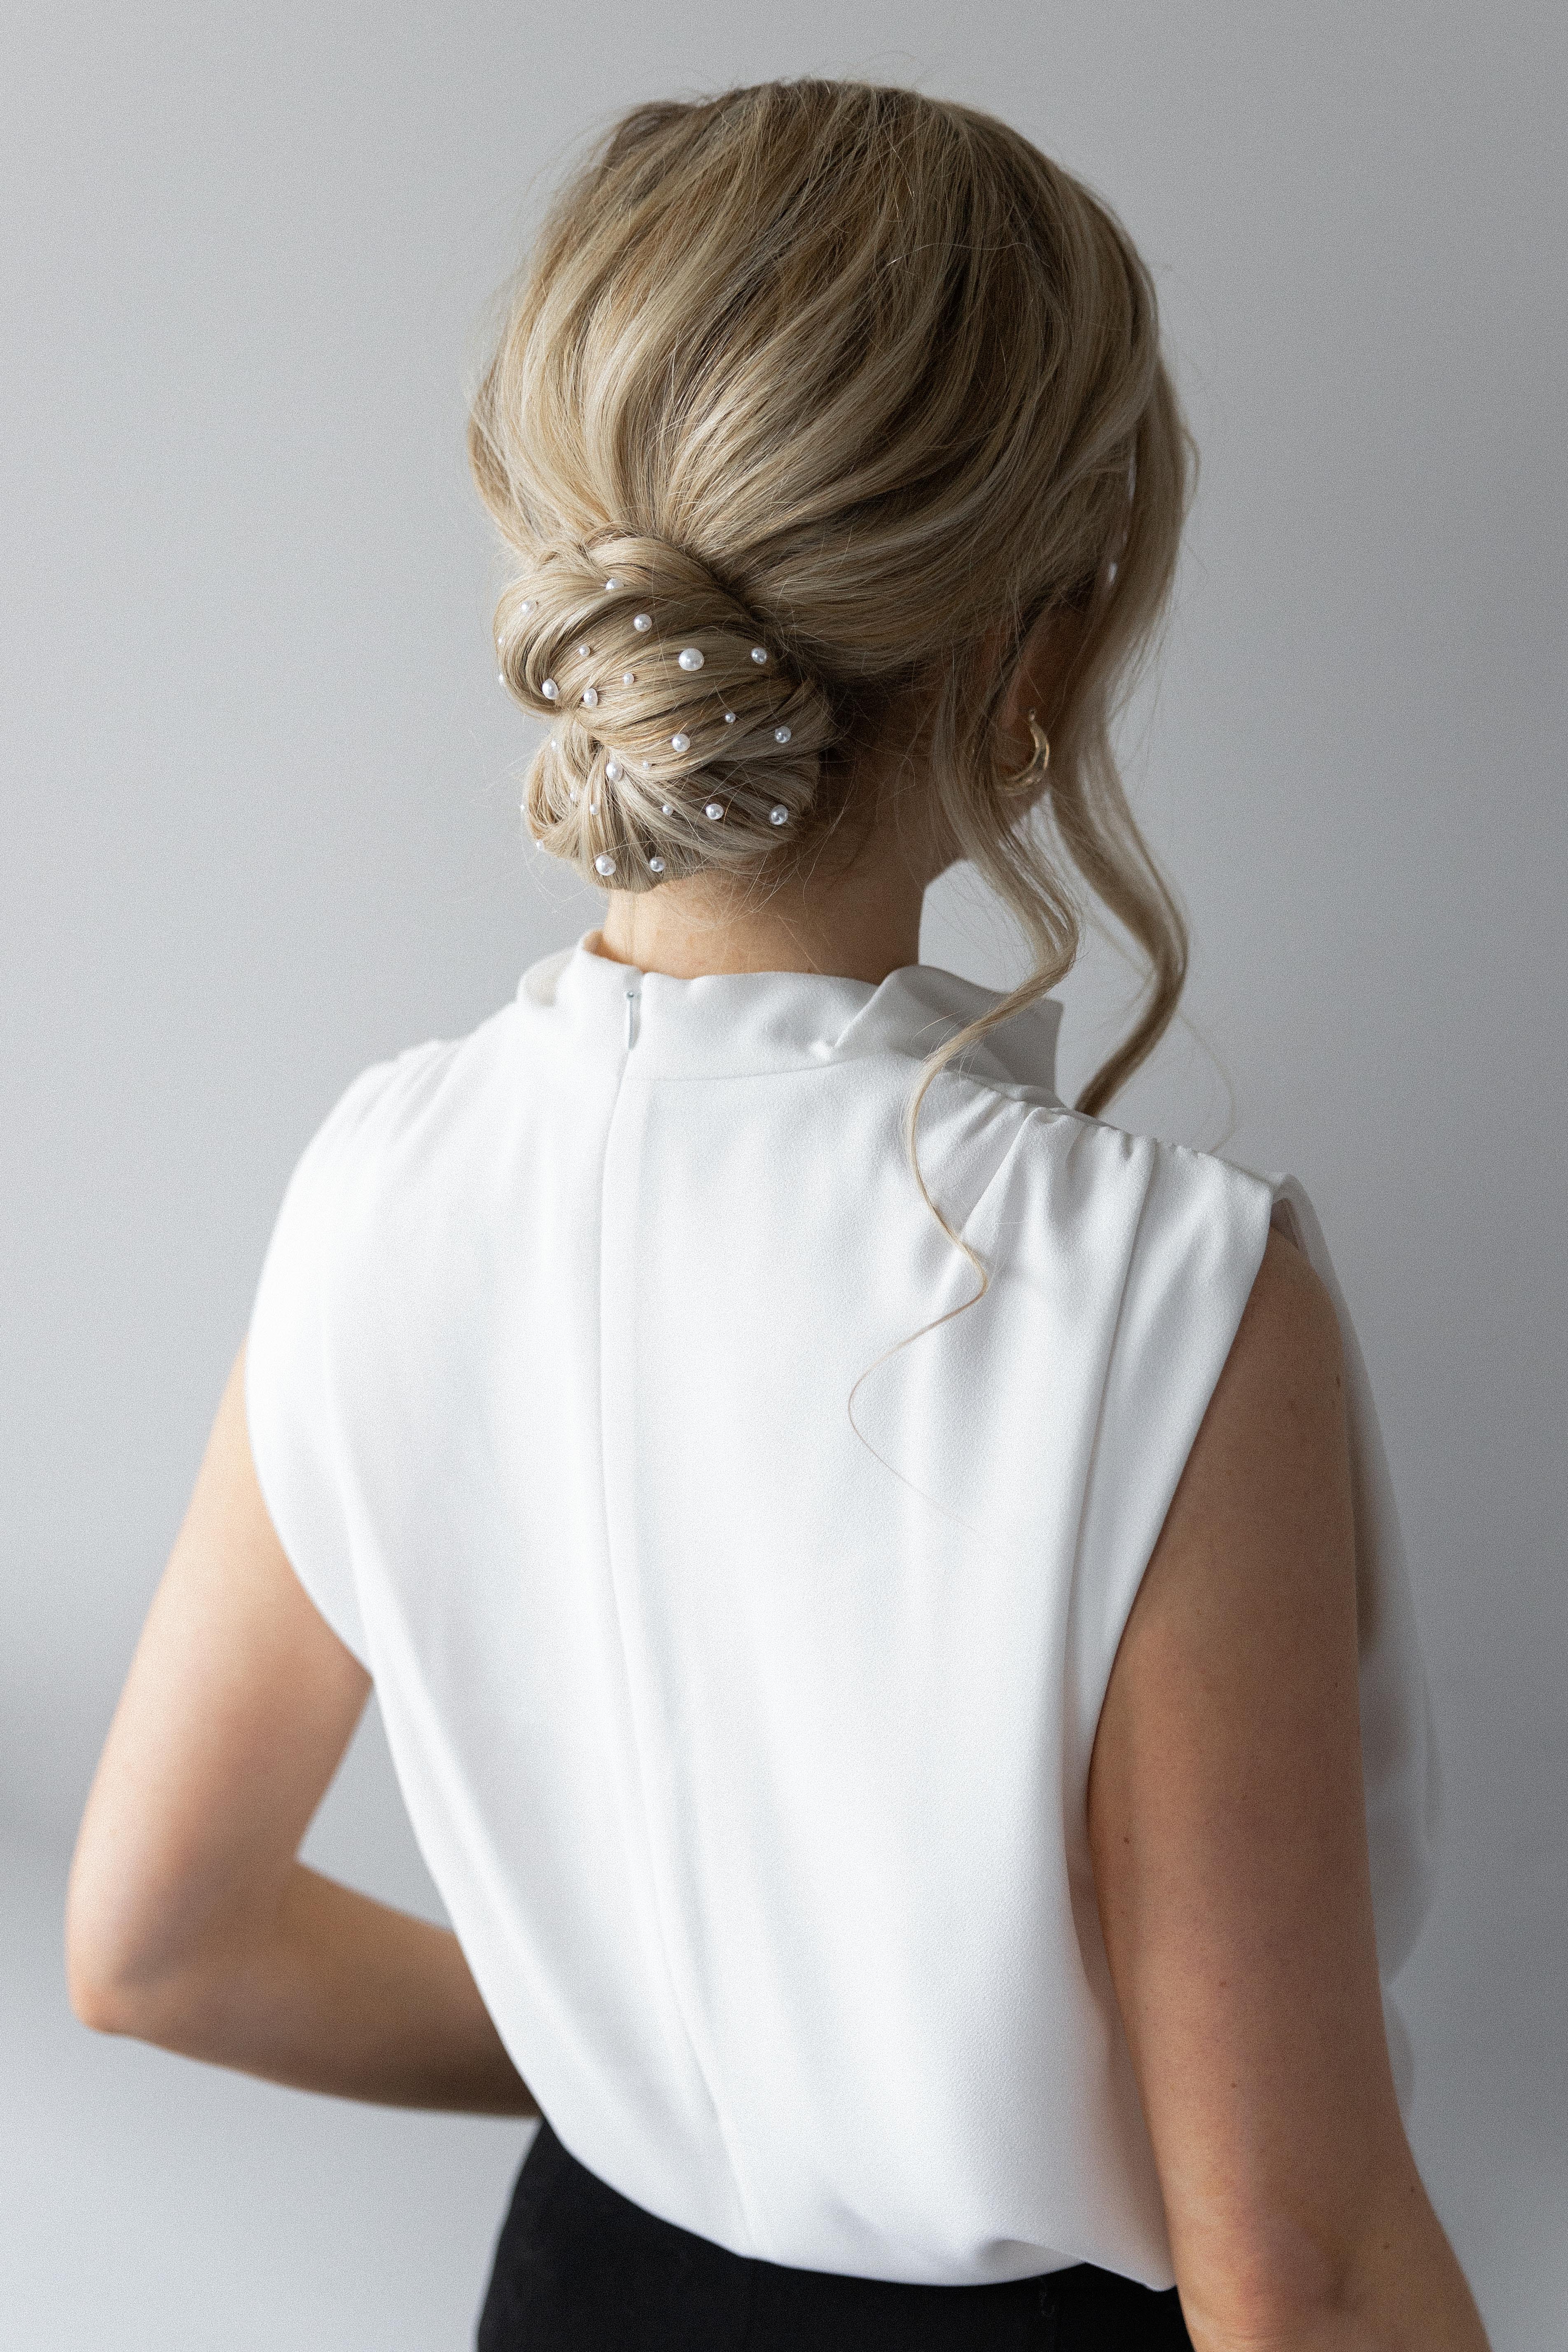 3 Minute Cute and Easy Low Bun Hairstyle with Pearls | www.alexgaboury.com